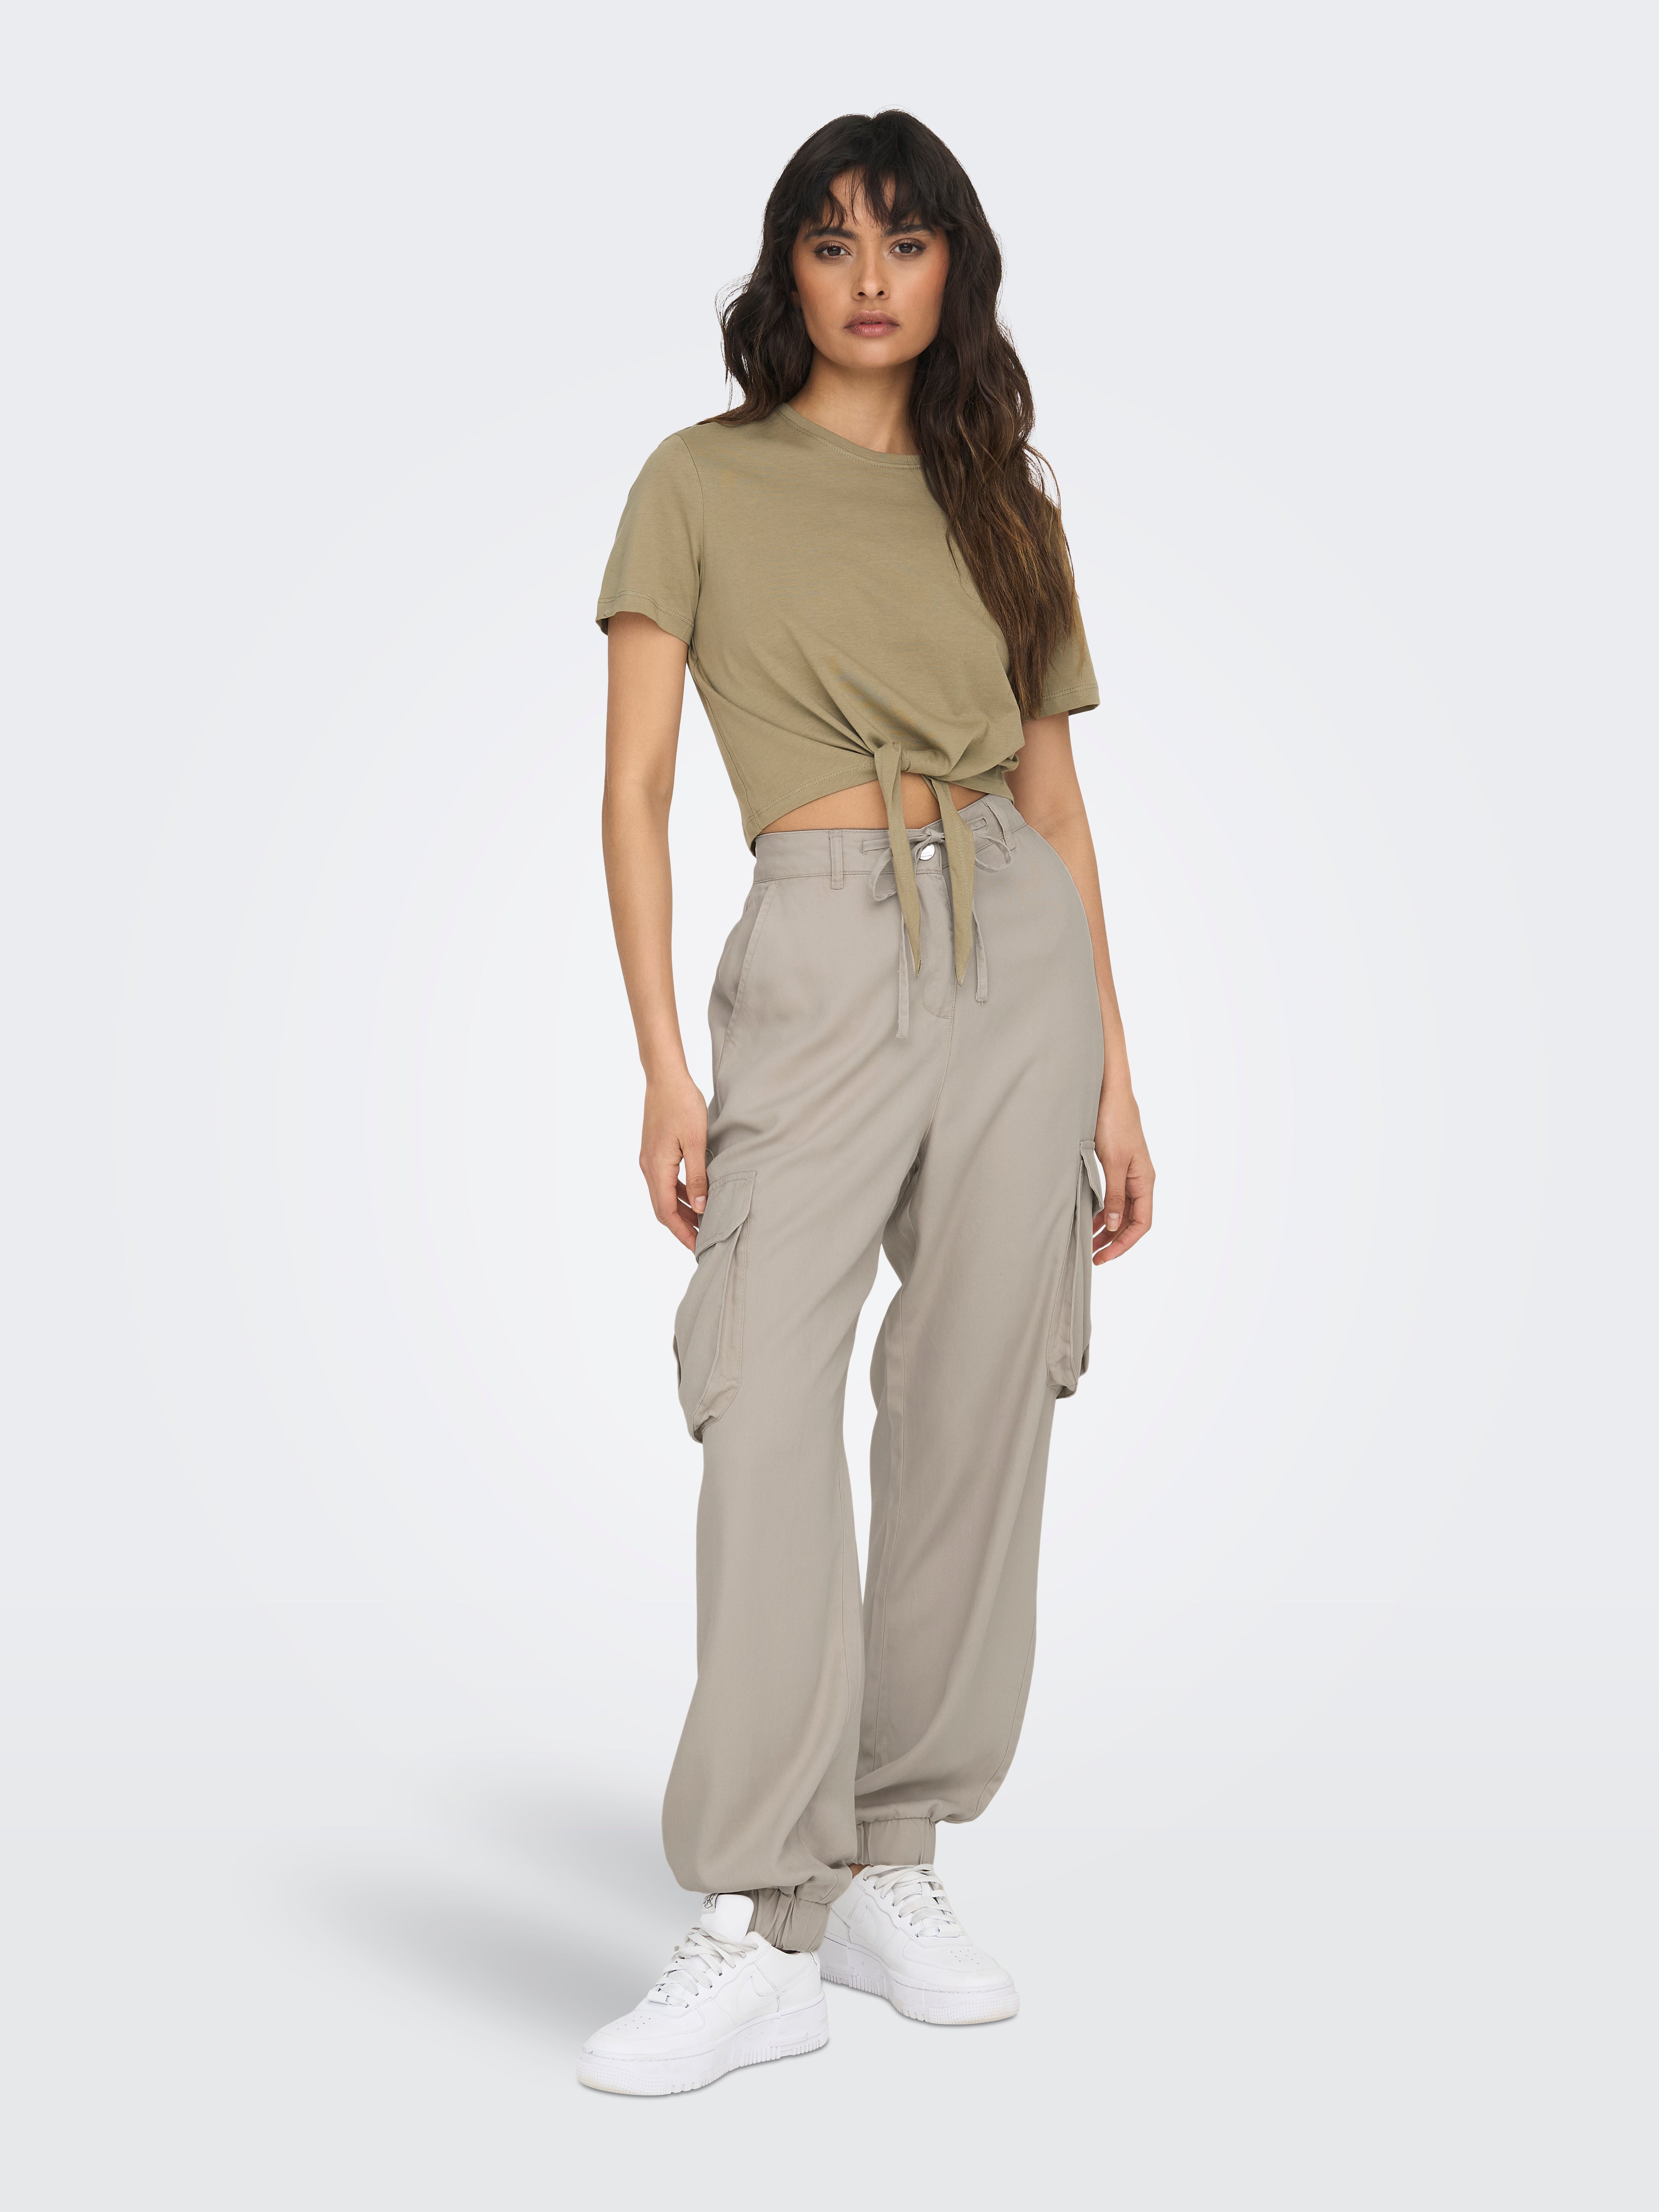 Dickies Eagle Bend Cargo Pant | Urban Outfitters